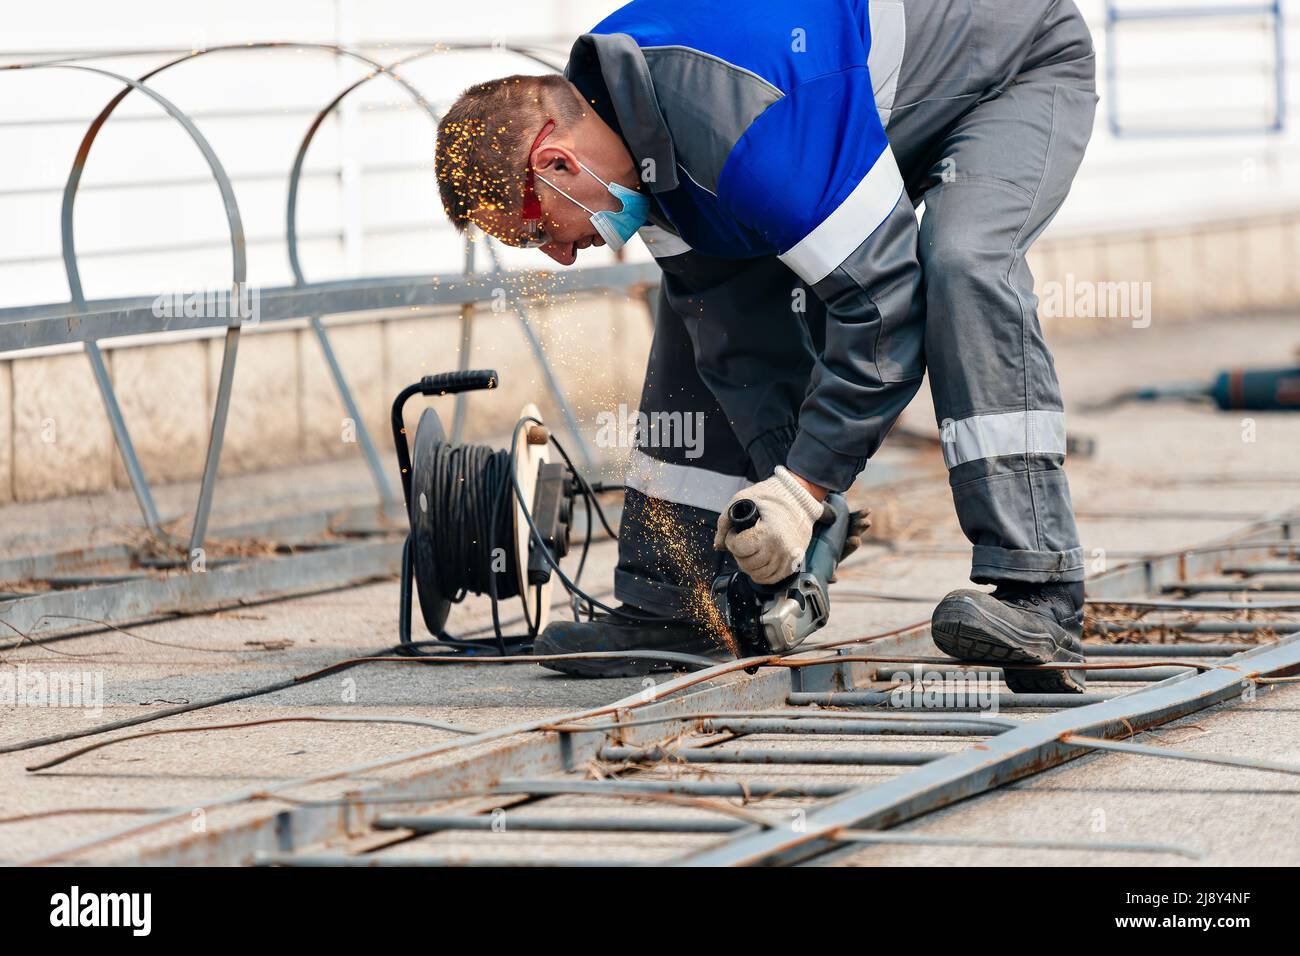 Builder in overalls leans over and cuts off metal sheet with angle grinder and sparks fly. Working man wearing goggles at work on street. Authentic workflow. Stock Photo